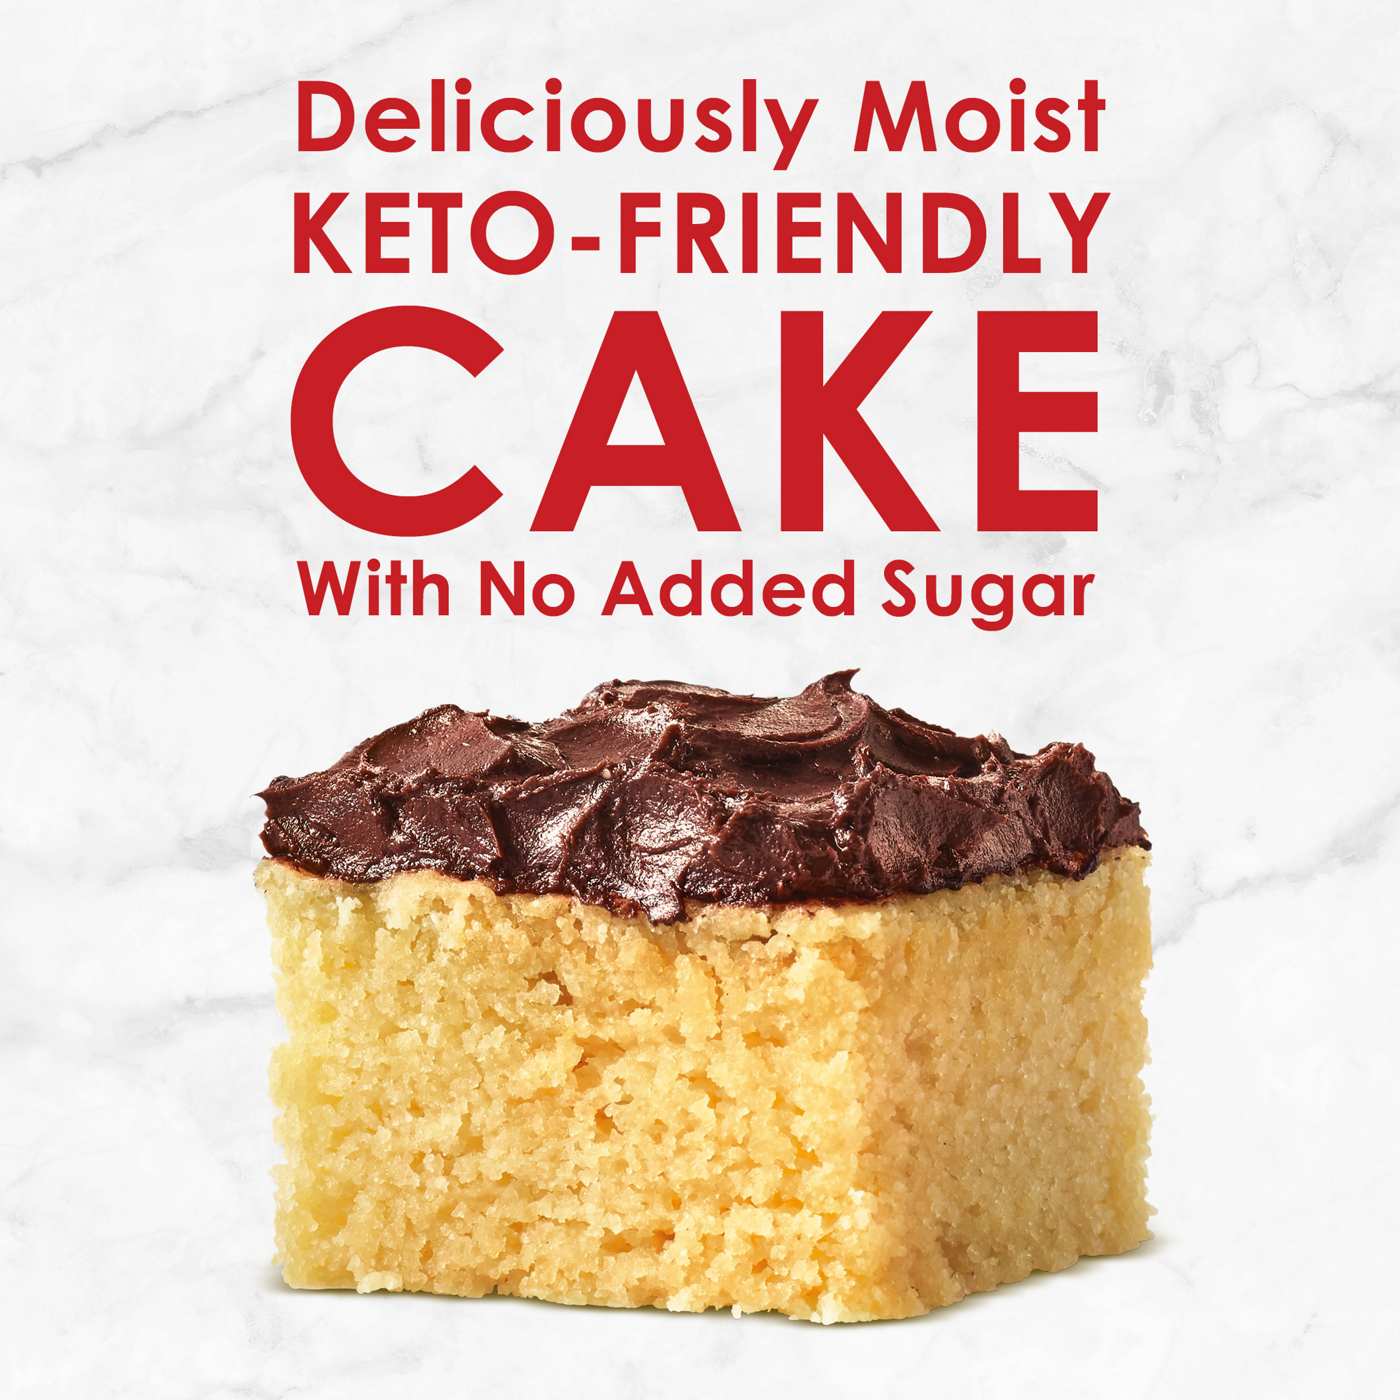 Duncan Hines Keto Friendly Gluten Free Classic Yellow Cake Mix; image 7 of 7